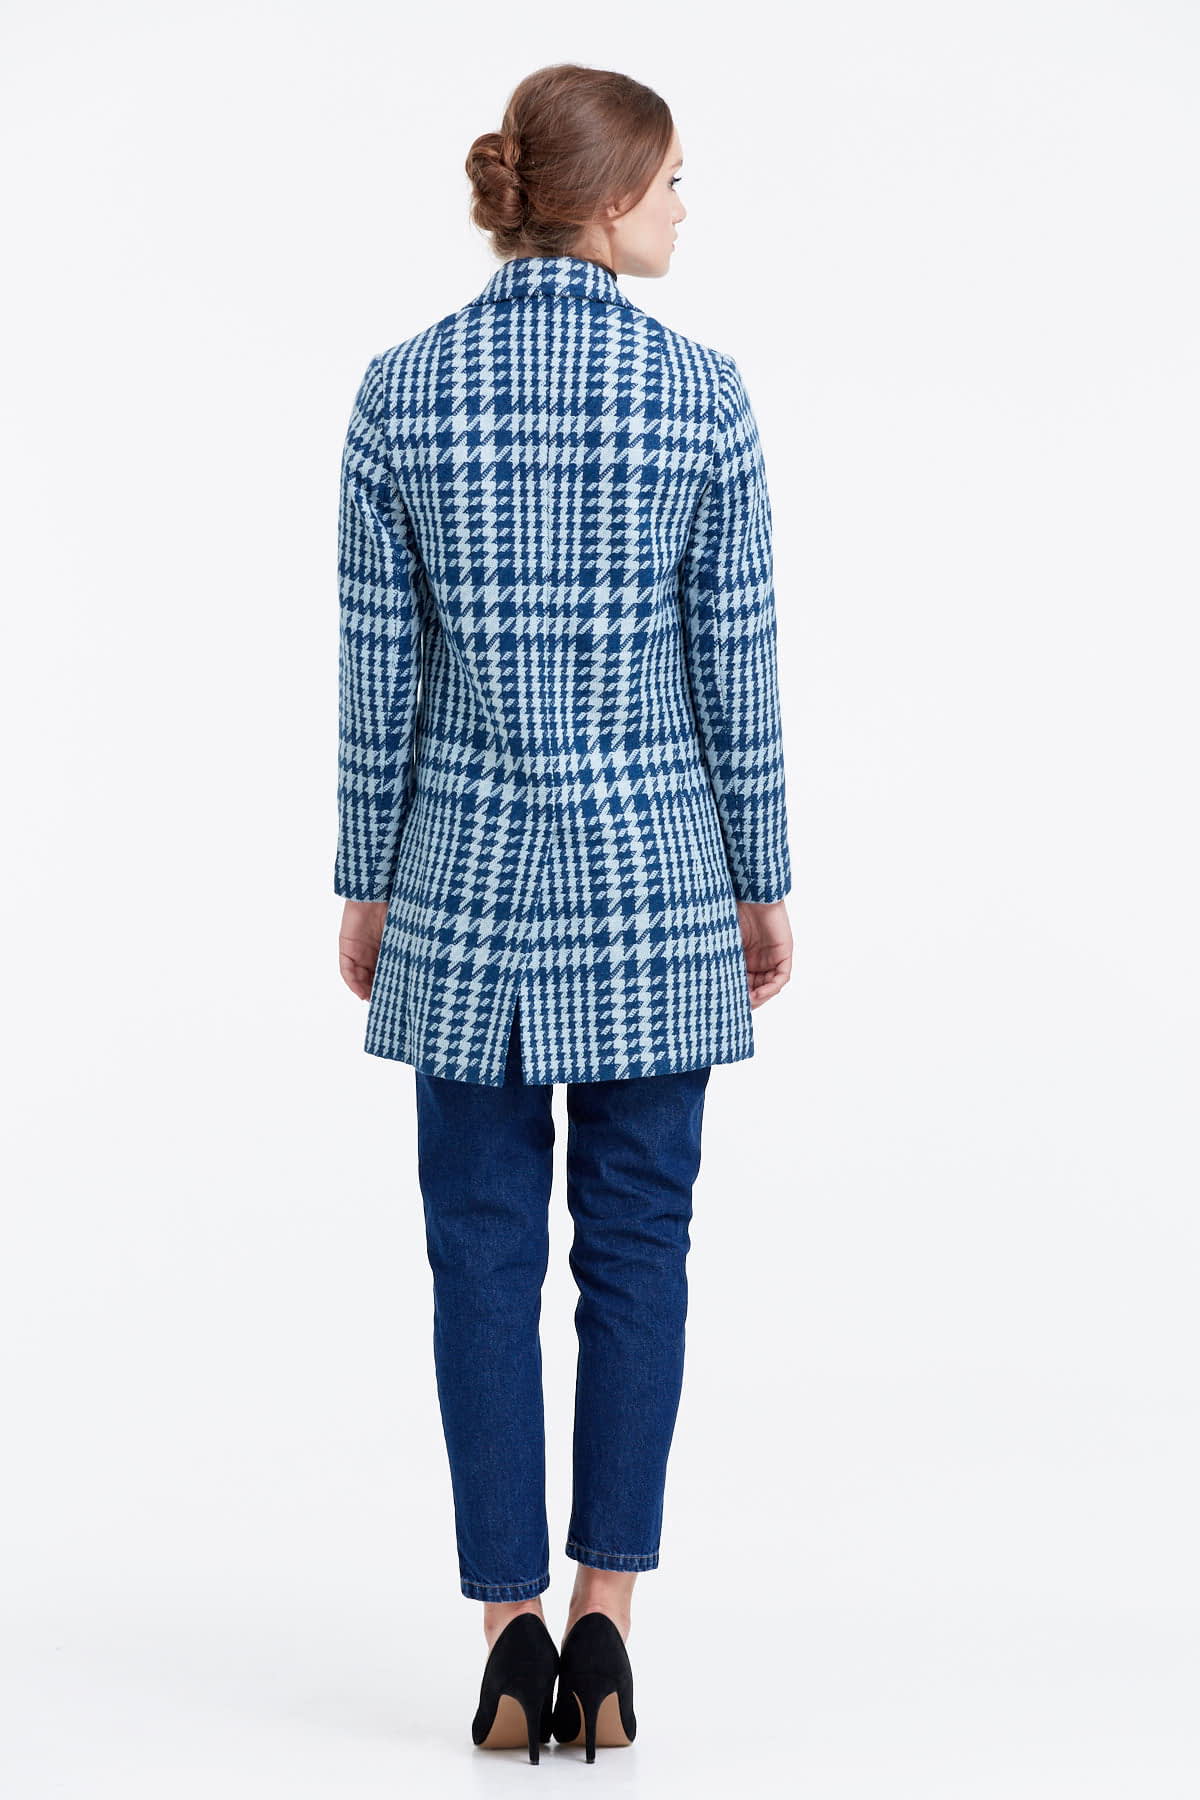 Long double-breasted jacket with a houndstooth print, photo 3